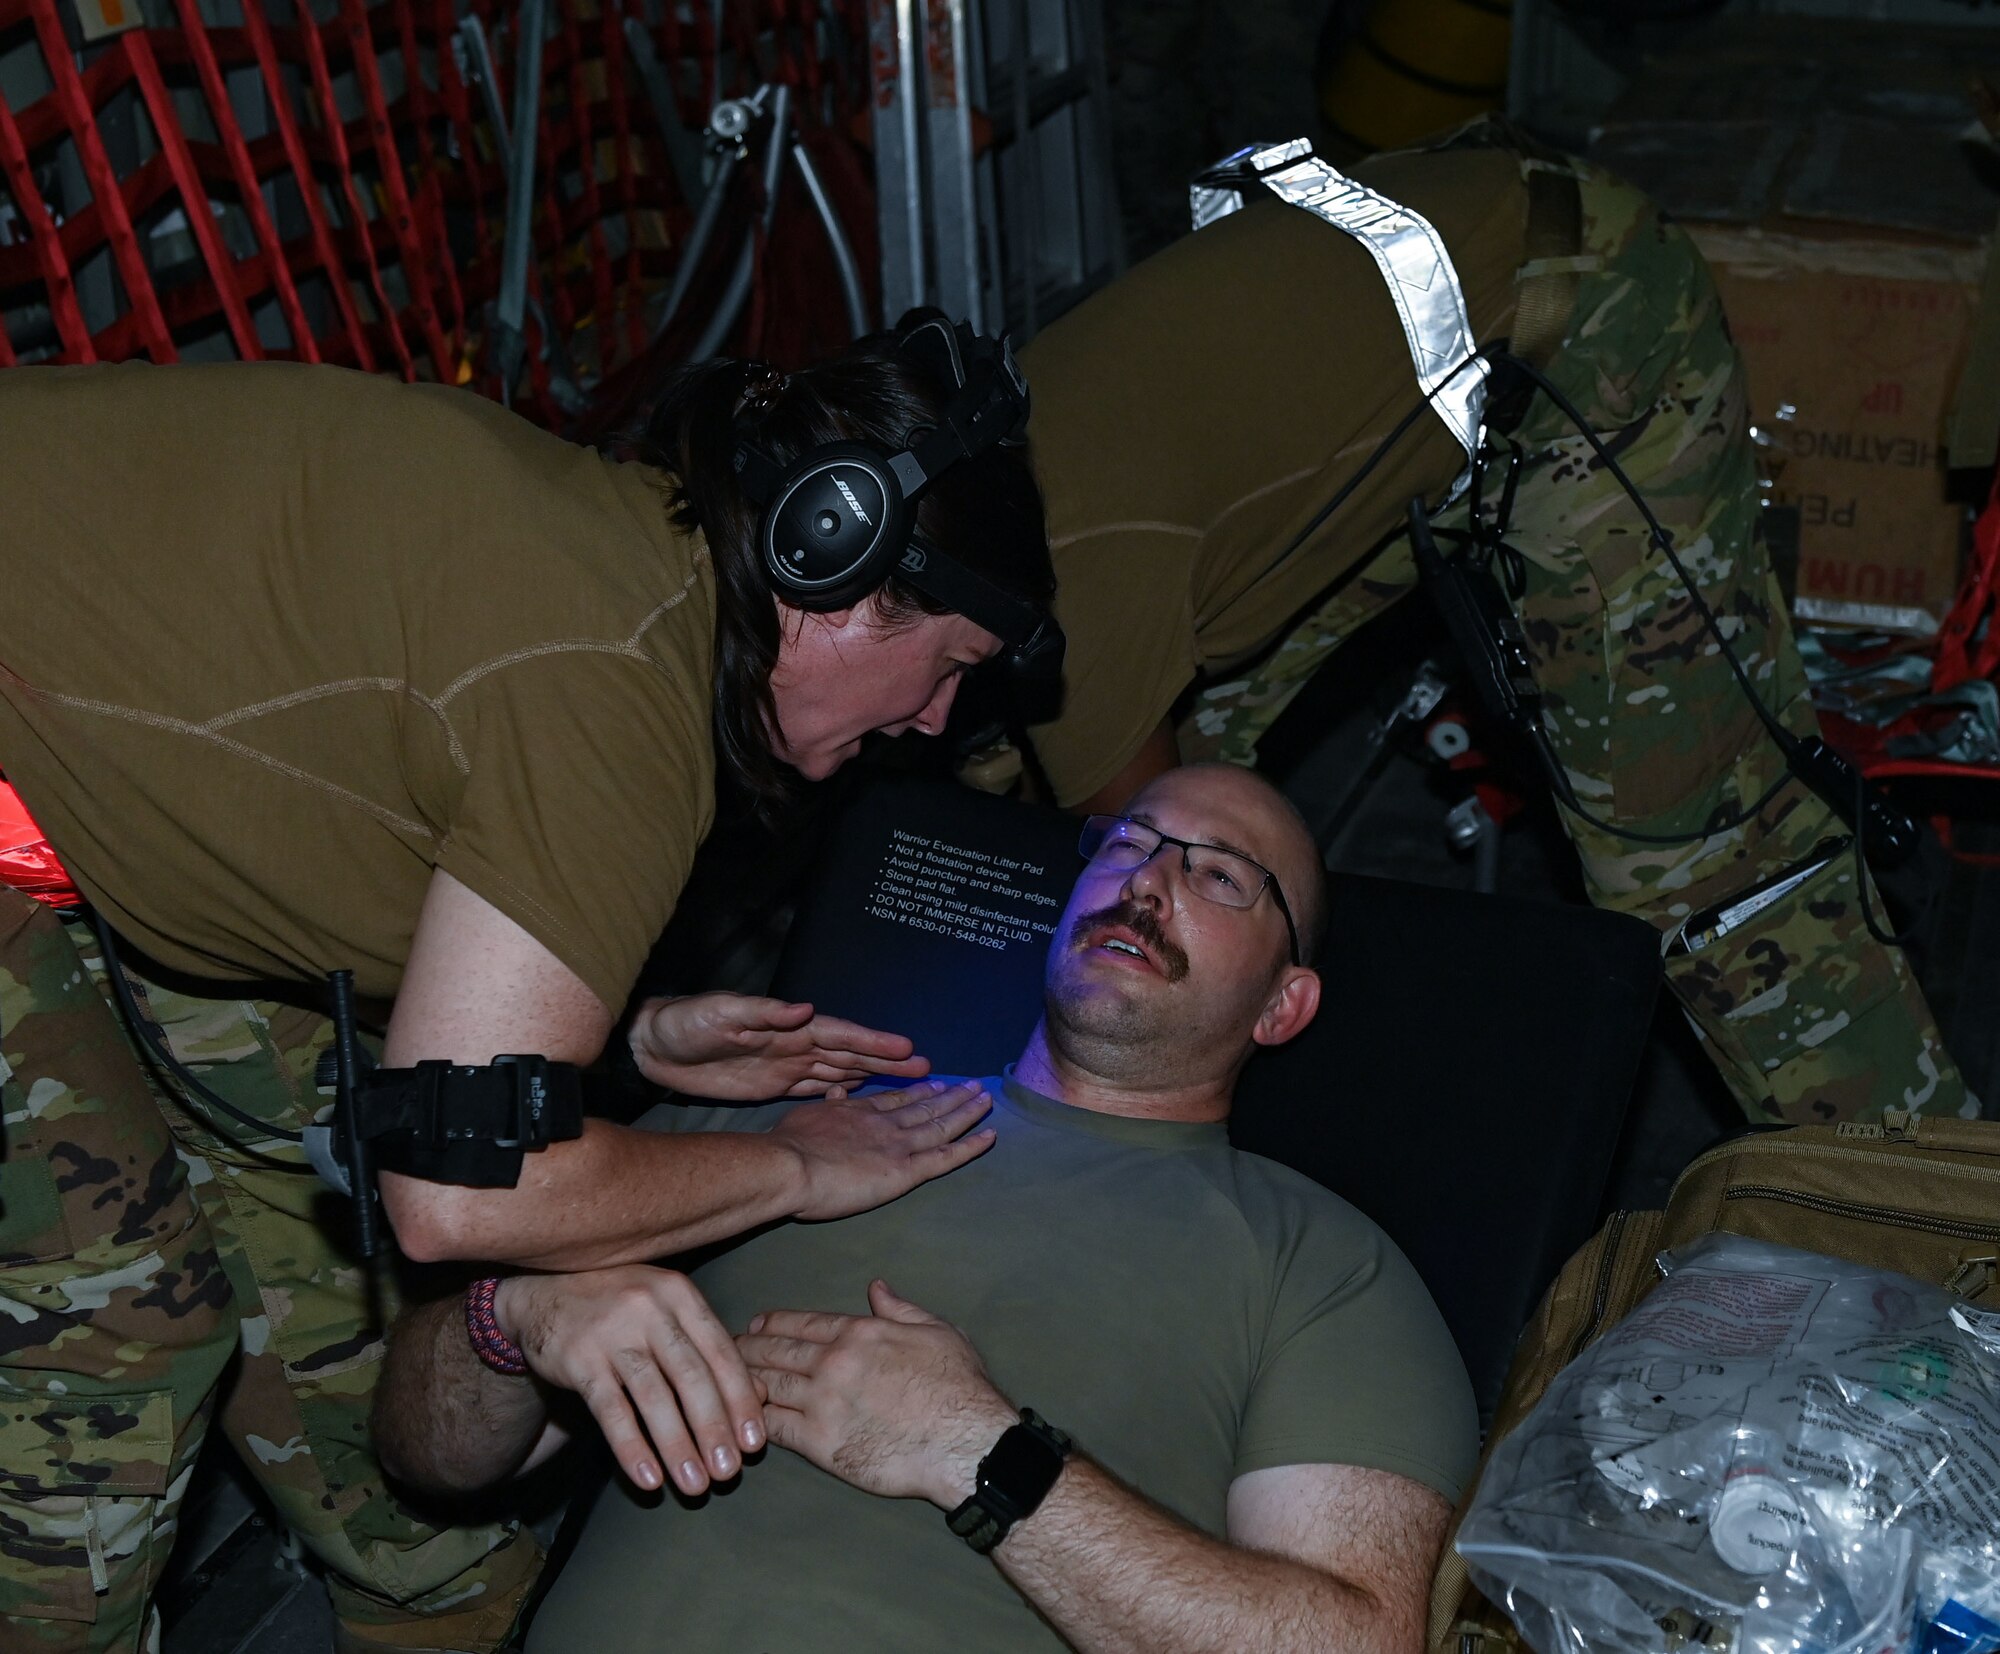 U.S. Air Force Capt. Beth Weaver (left), a 379th Expeditionary Air Evacuation Squadron nurse, tends to a patient during an exercise Aug 4, 2022 at Al Udeid Airbase, Qatar. The medical staff tended to a variety of injuries in order to test their readiness to the fullest extent. (U.S. Air National Guard photo by Master Sgt. Michael J. Kelly)